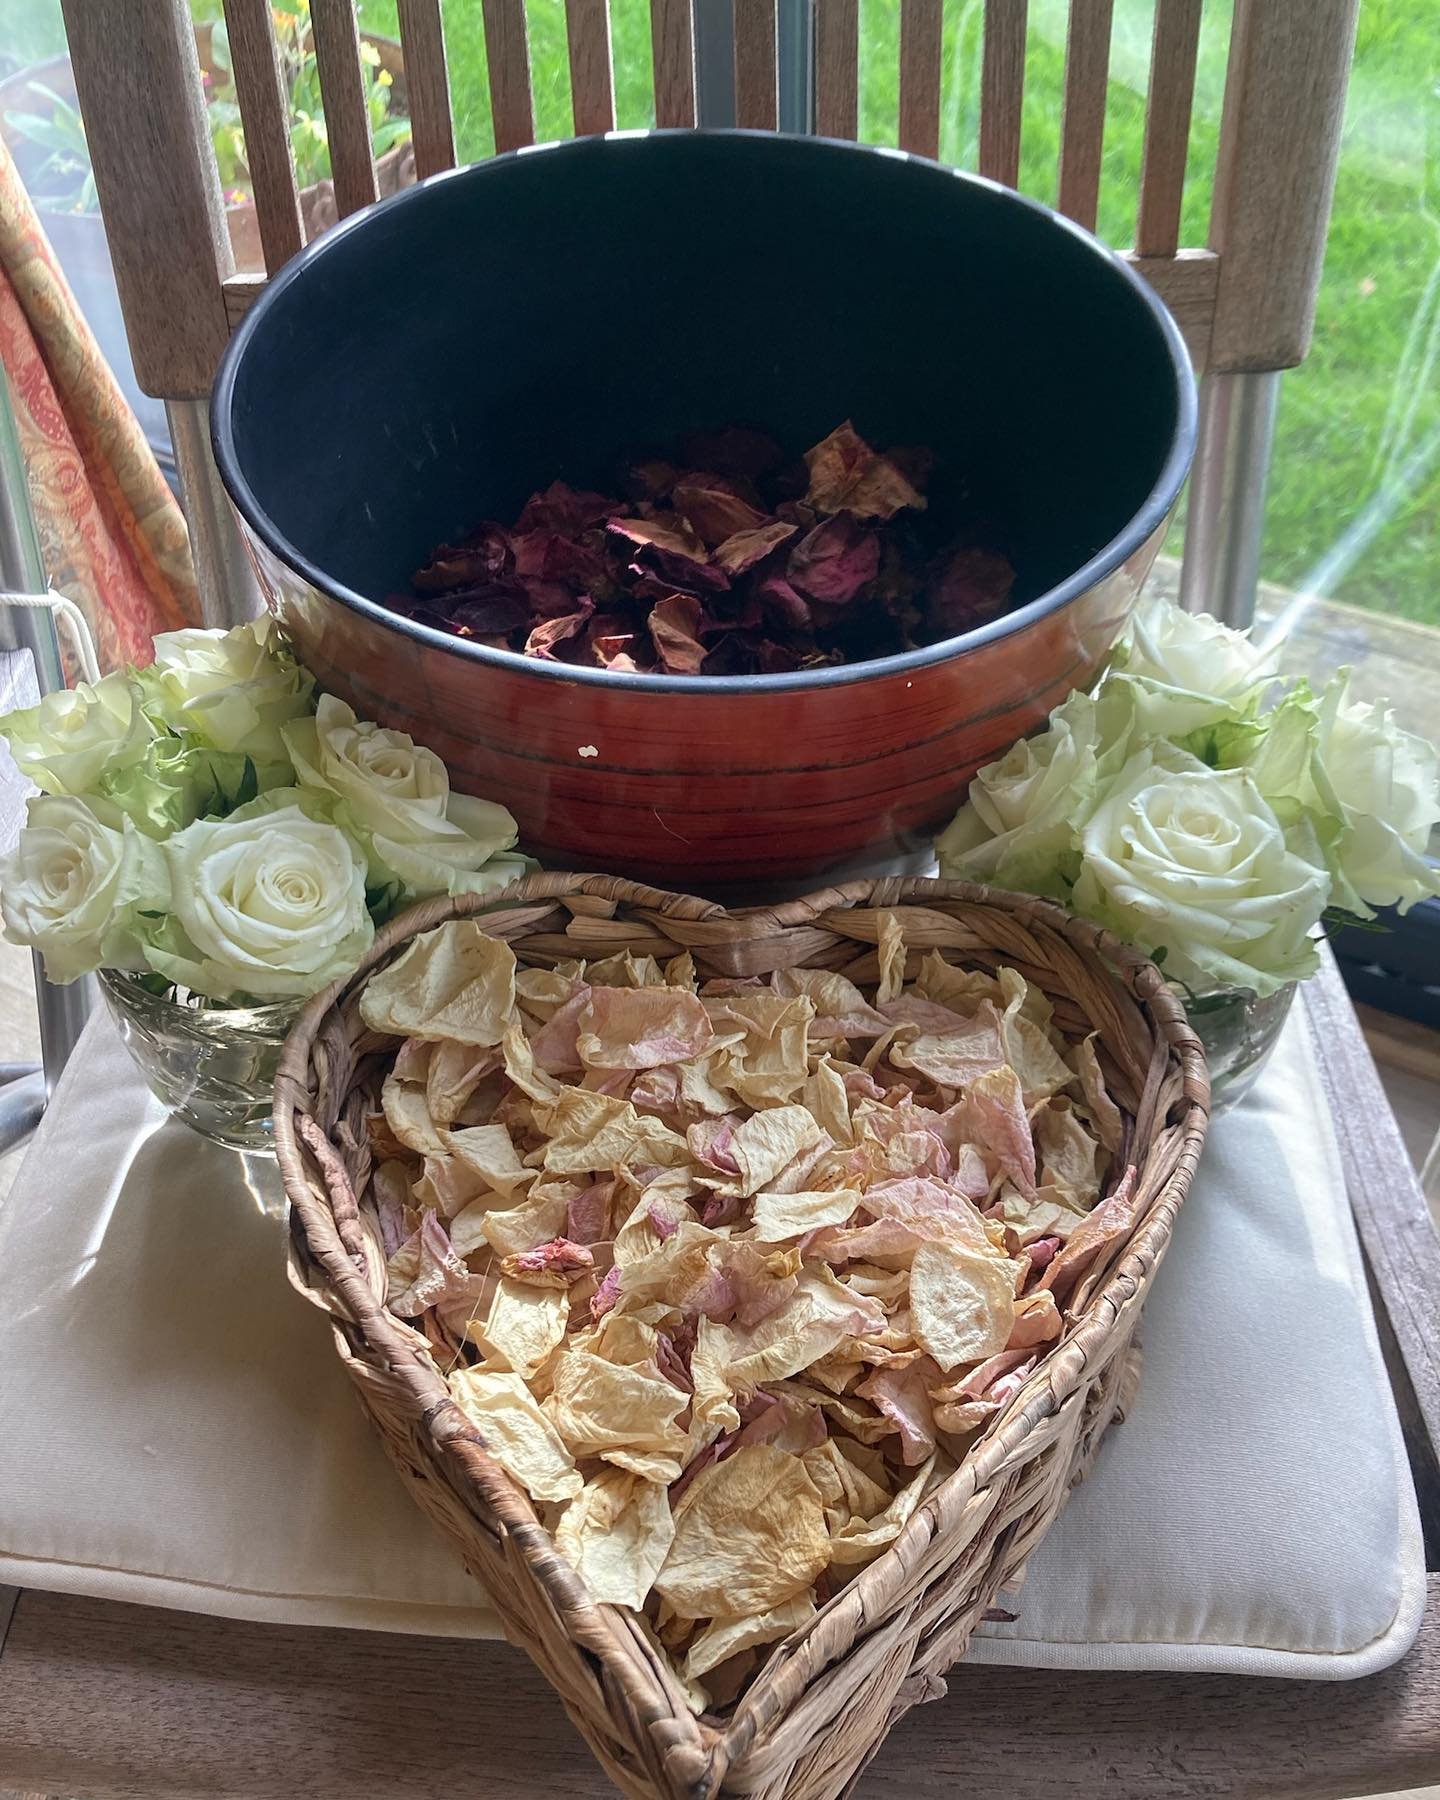 🌸🌿ROSE PETALS &amp; LAVENDER🌿💜

I have loved creating flowers for Weddings and have been honoured to be part of the magical day&hellip;&hellip;

What I am learning more recently is that at the end of our lives our Funerals are understandably somb